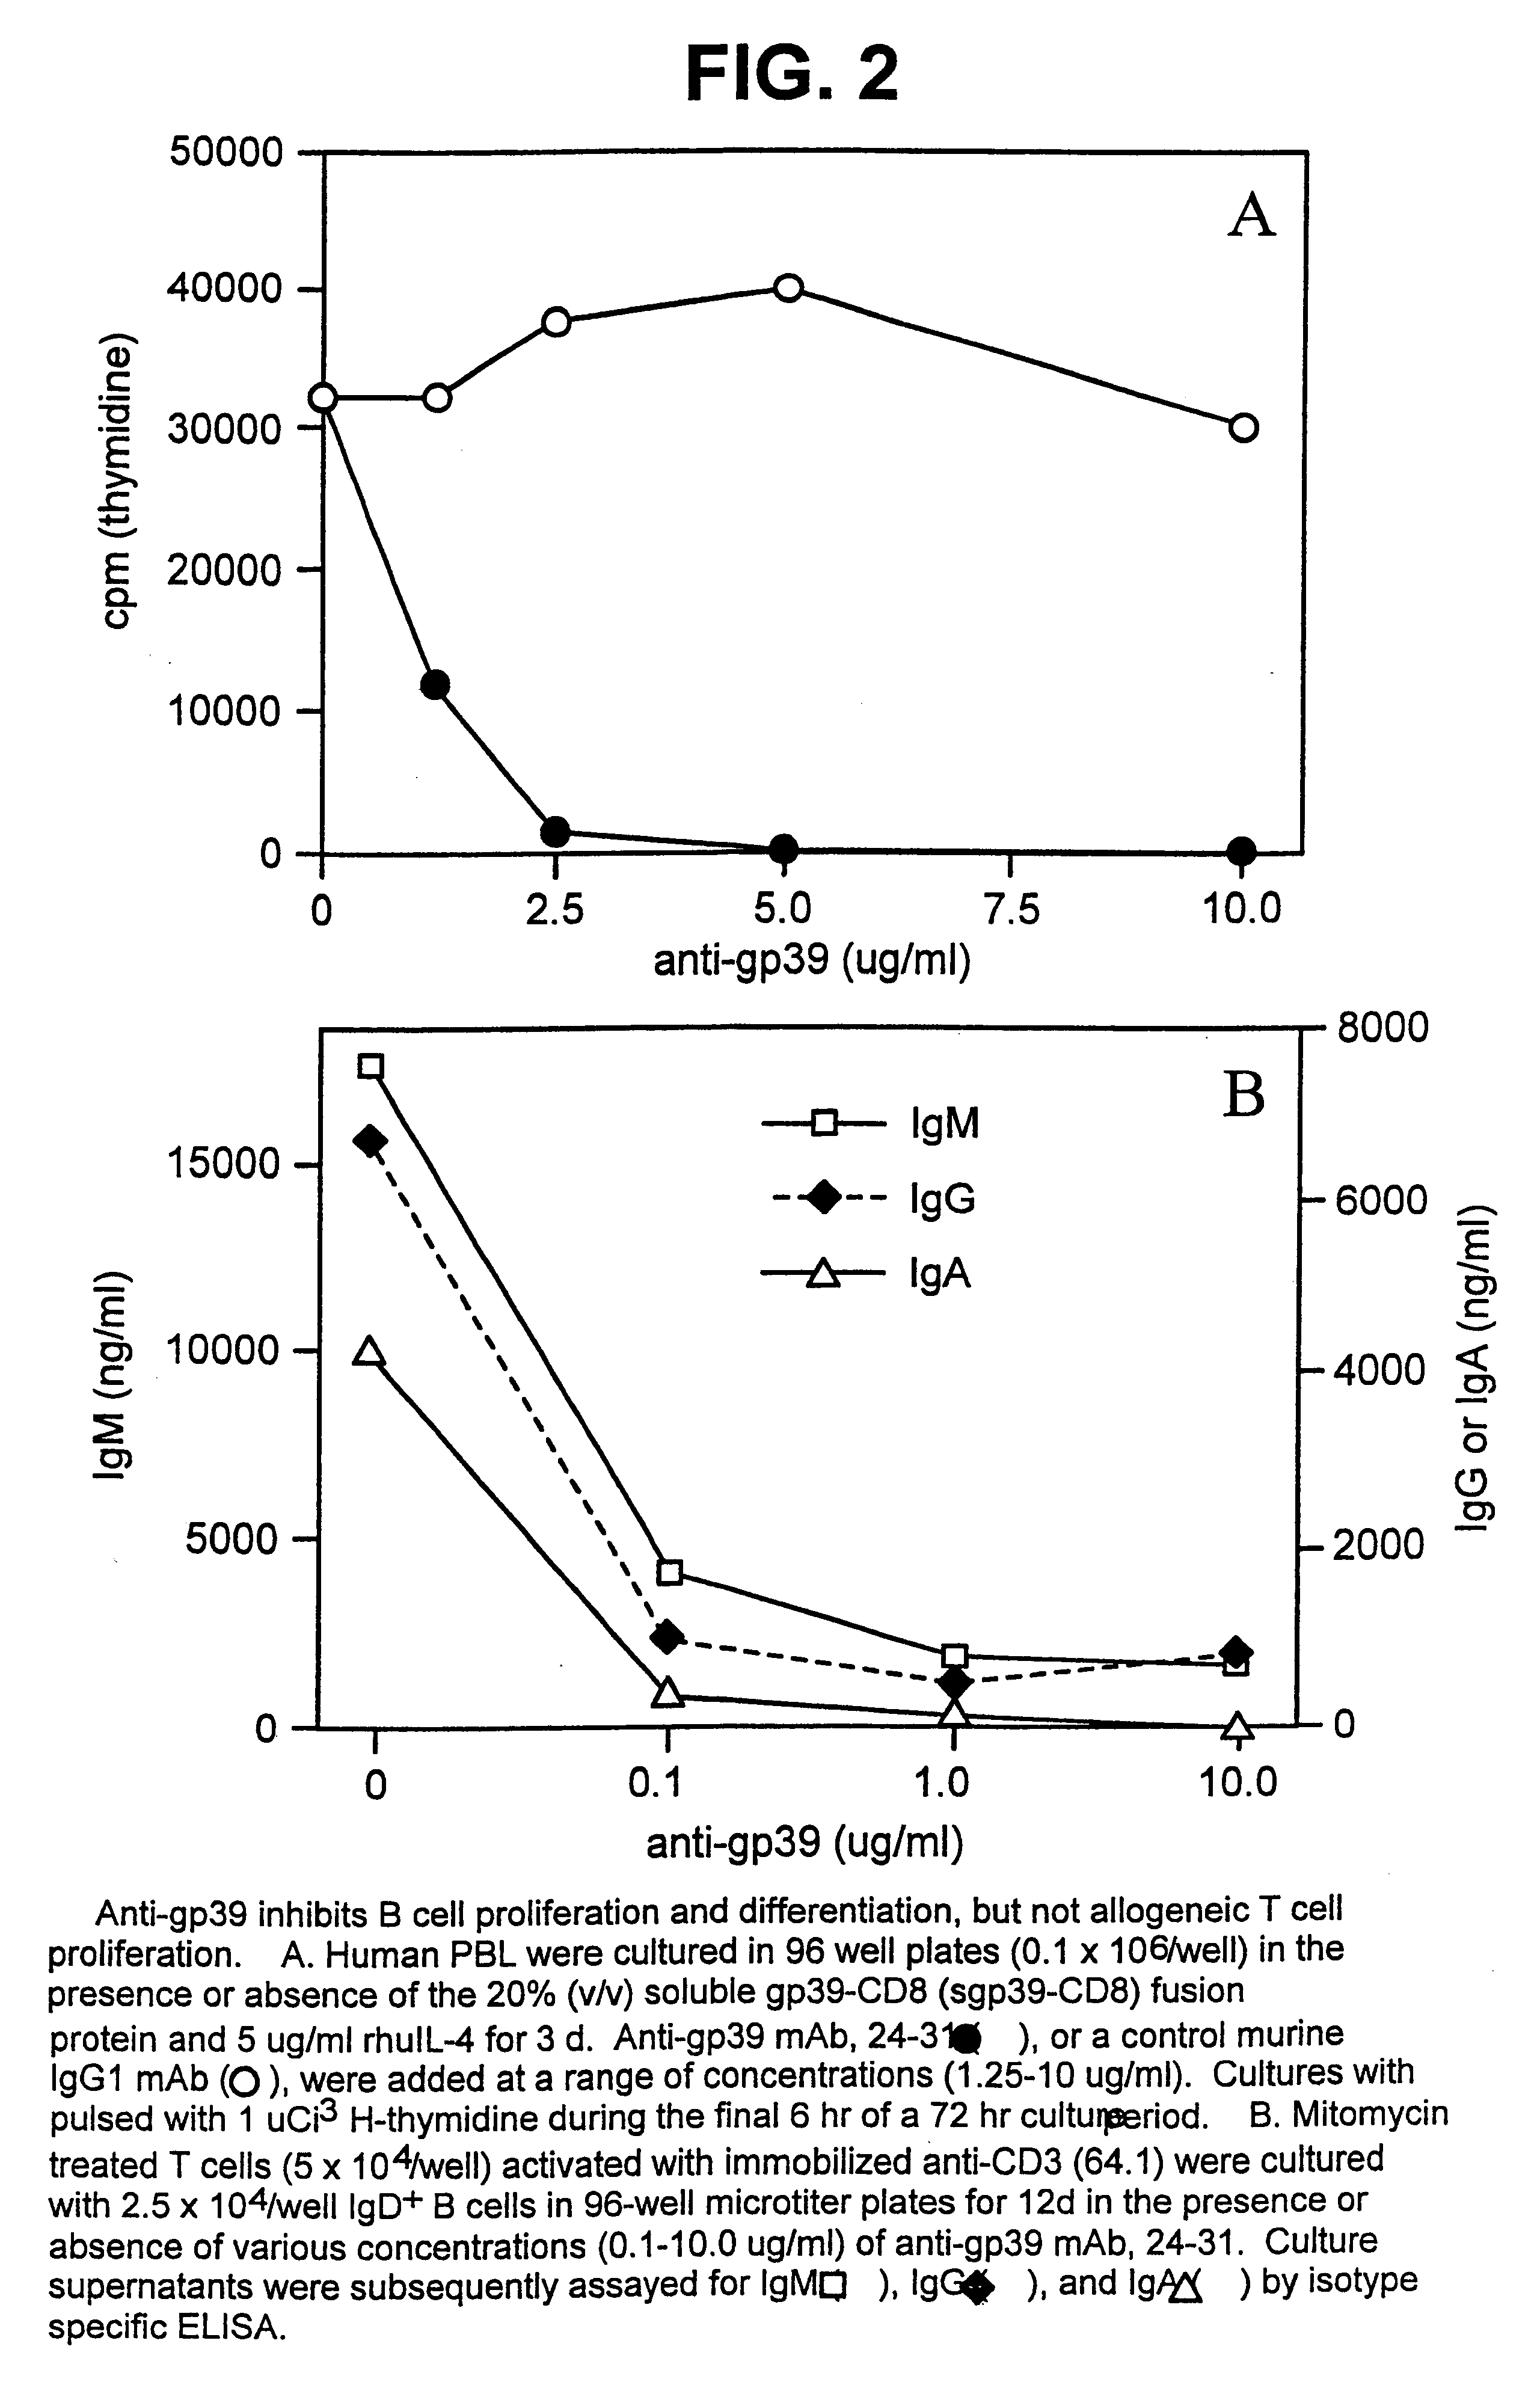 Methods of suppressing immune responses to transplanted tissues and organs with gp39-specific antibodies